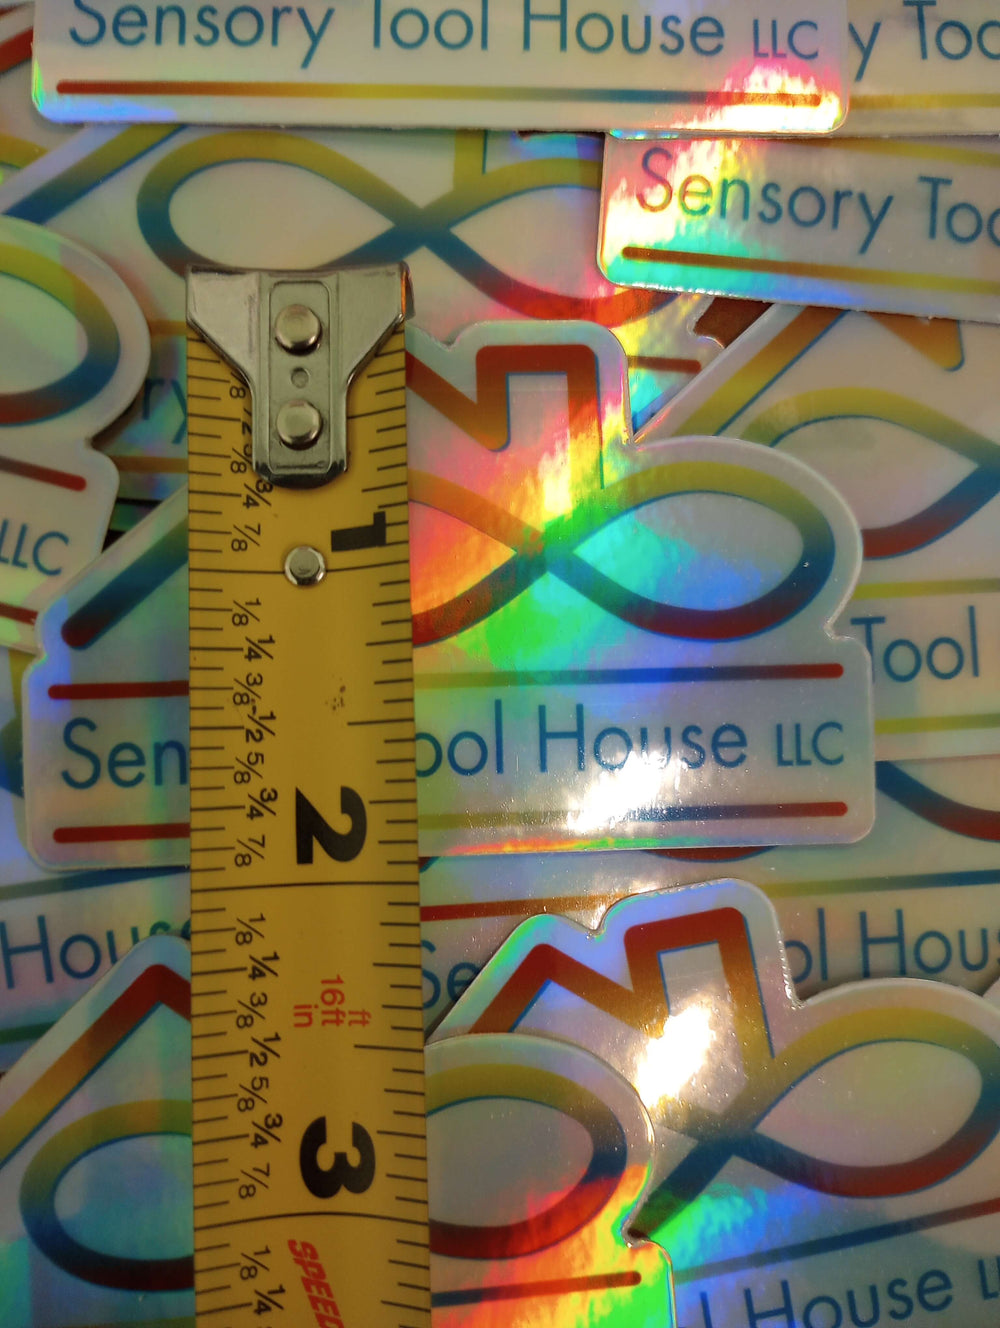 A measuring tape illustrating the dimensions of the Sensory Tool House Holographic Sticker.